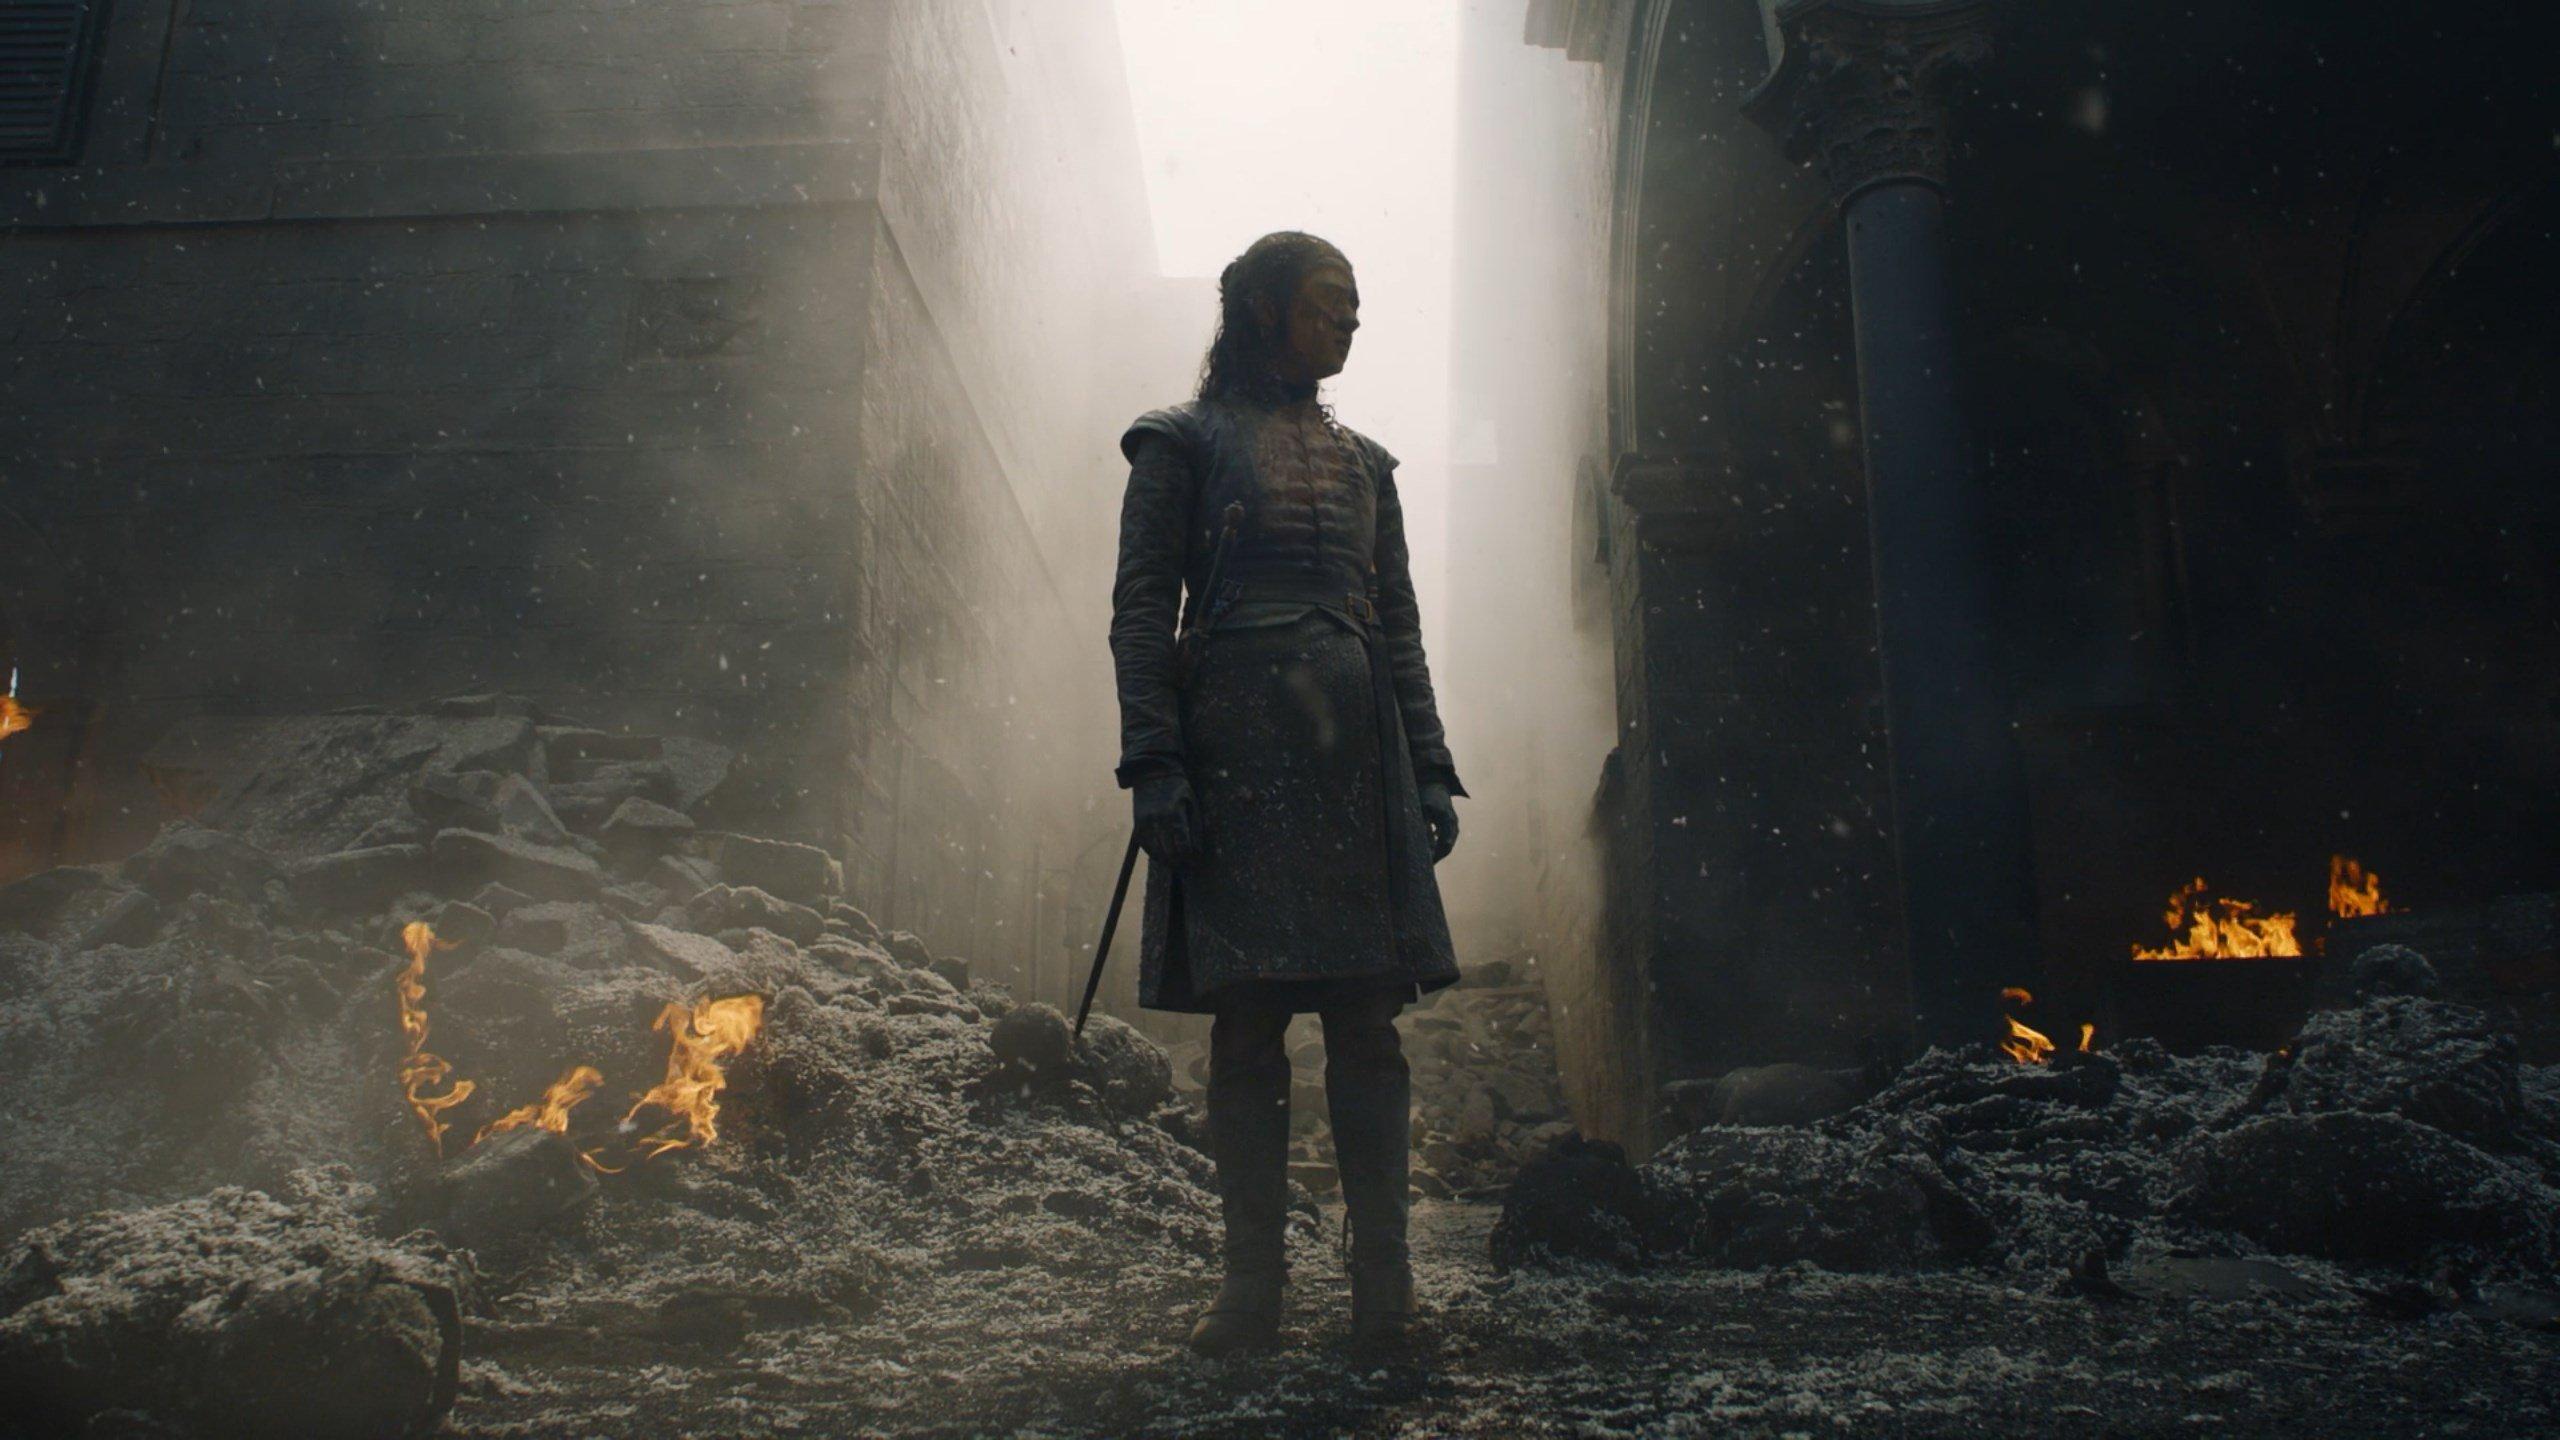 Arya 4K wallpaper for your desktop or mobile screen free and easy